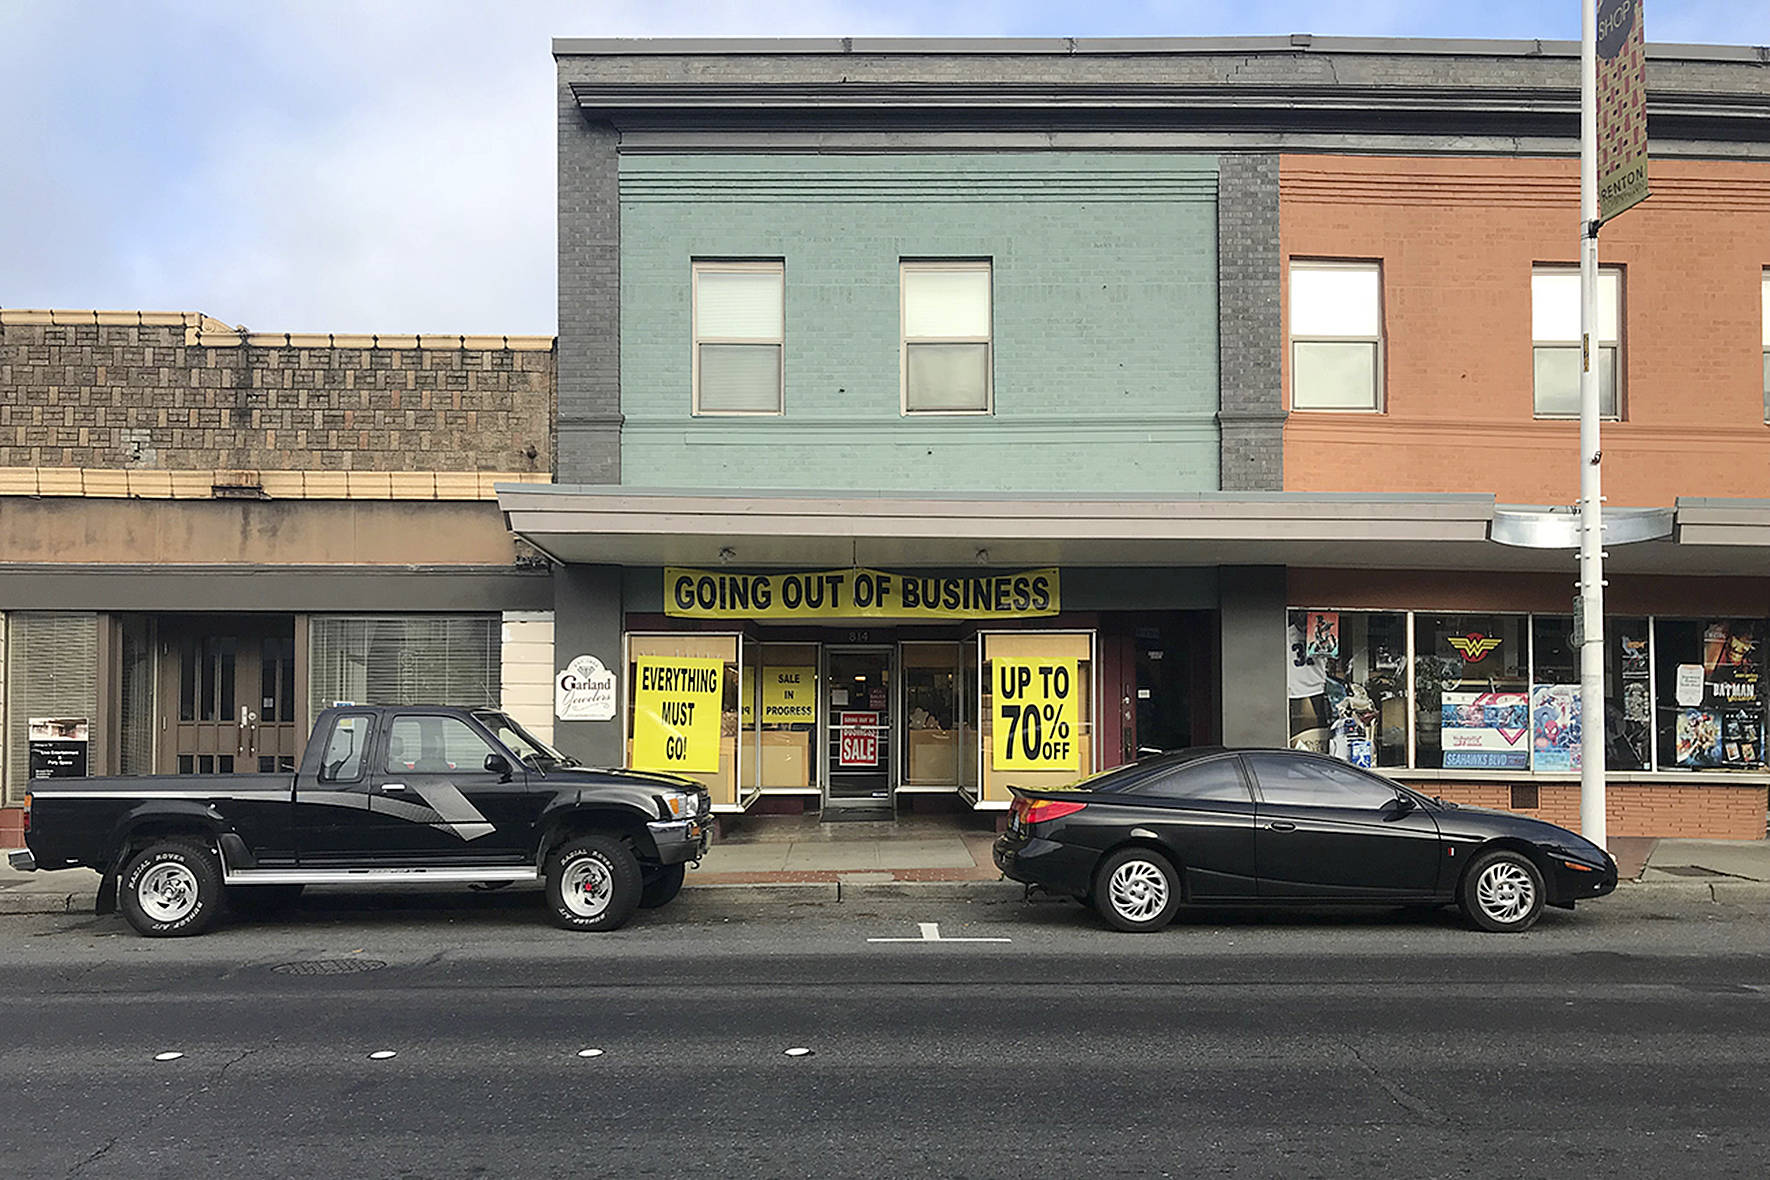 Garland Jewelers has sat in the main stretch of downtown over 60 years. As it closes this month, big yellow banners indicate the end of an era. Photo by Haley Ausbun.